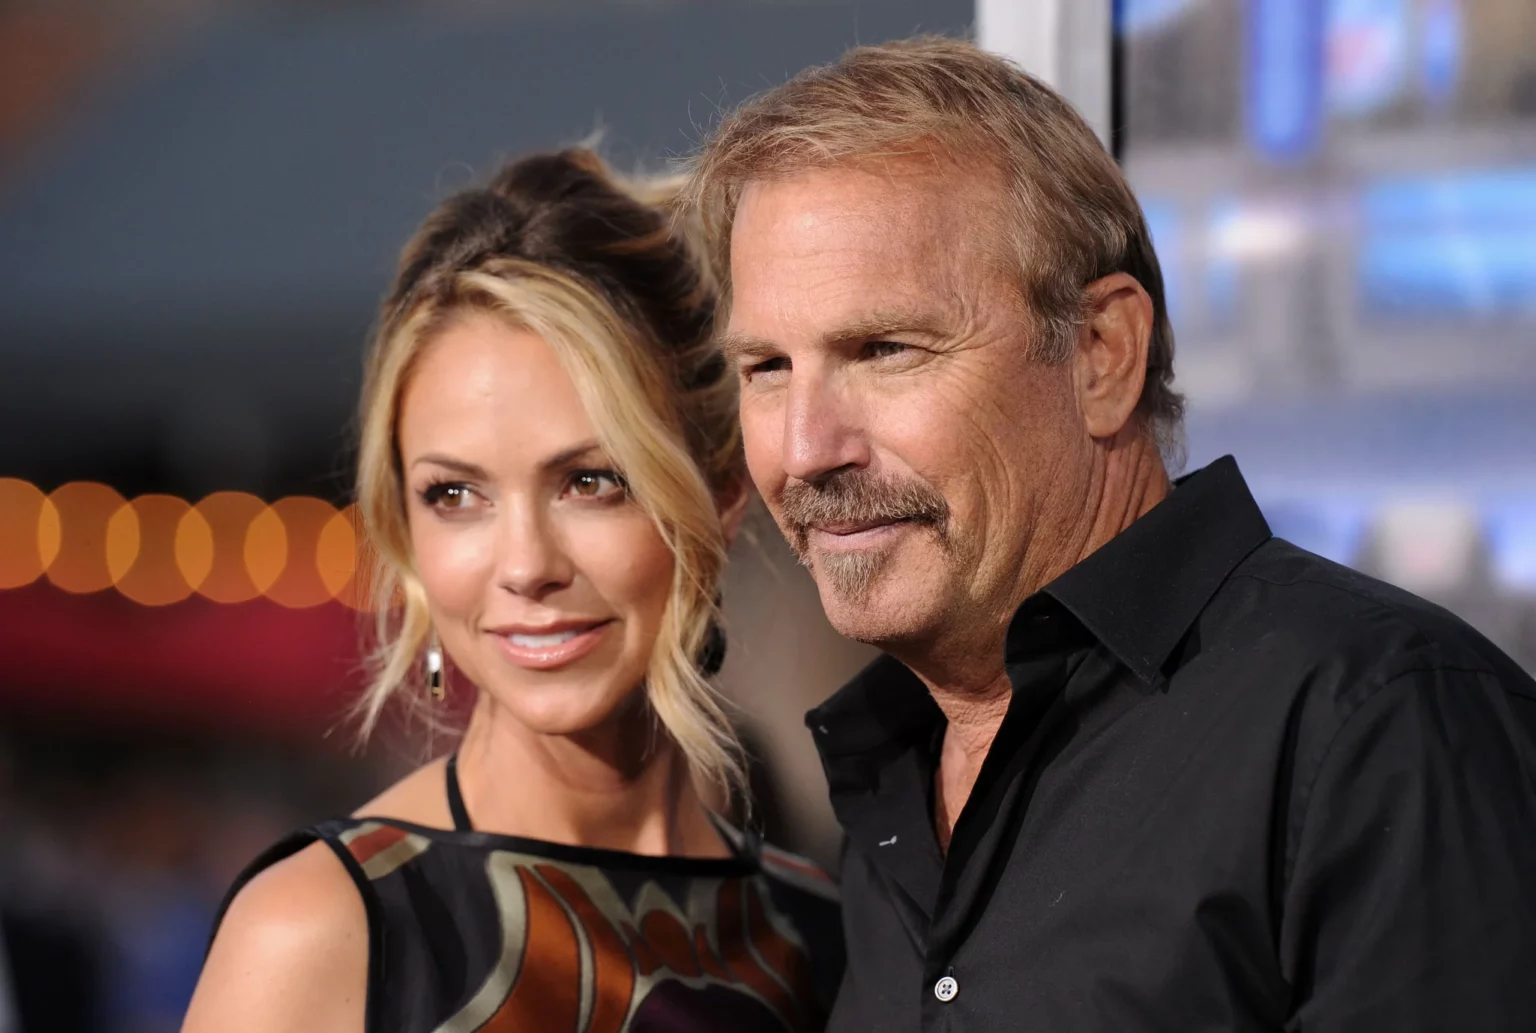 kevin-costner-wife-files-for-divorce-after-18-years-of-marriage